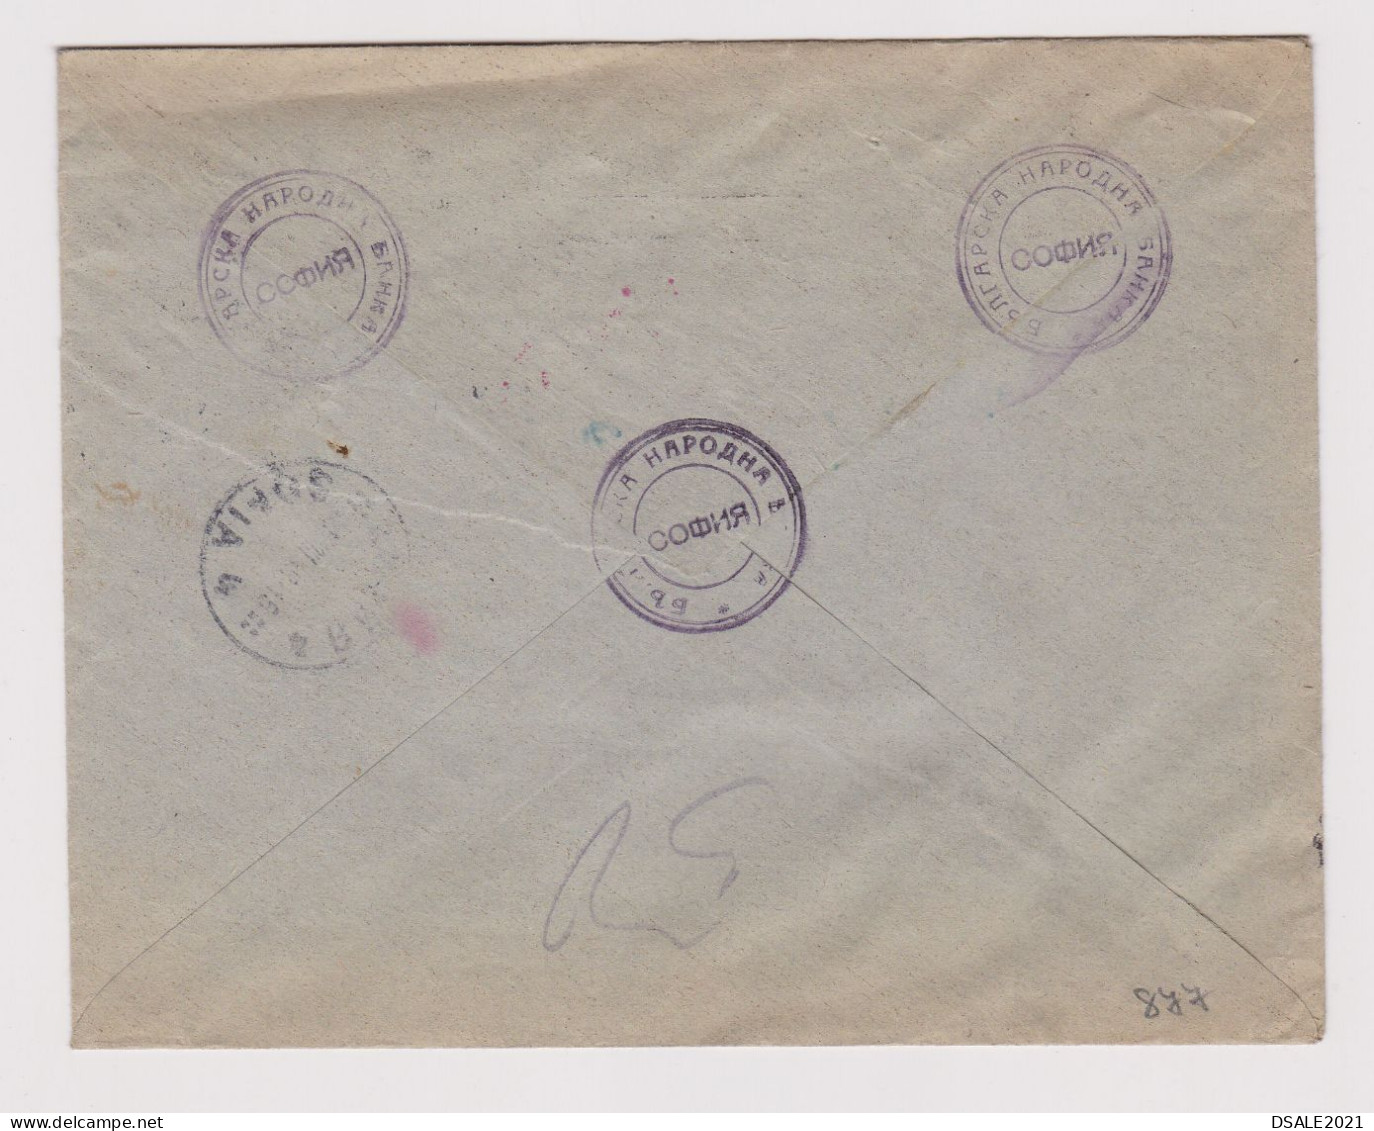 Bulgaria Bulgarien 1940s Registered Bank Cover With Perfin, Topic Stamps, Domestic Used Rare (877) - Covers & Documents